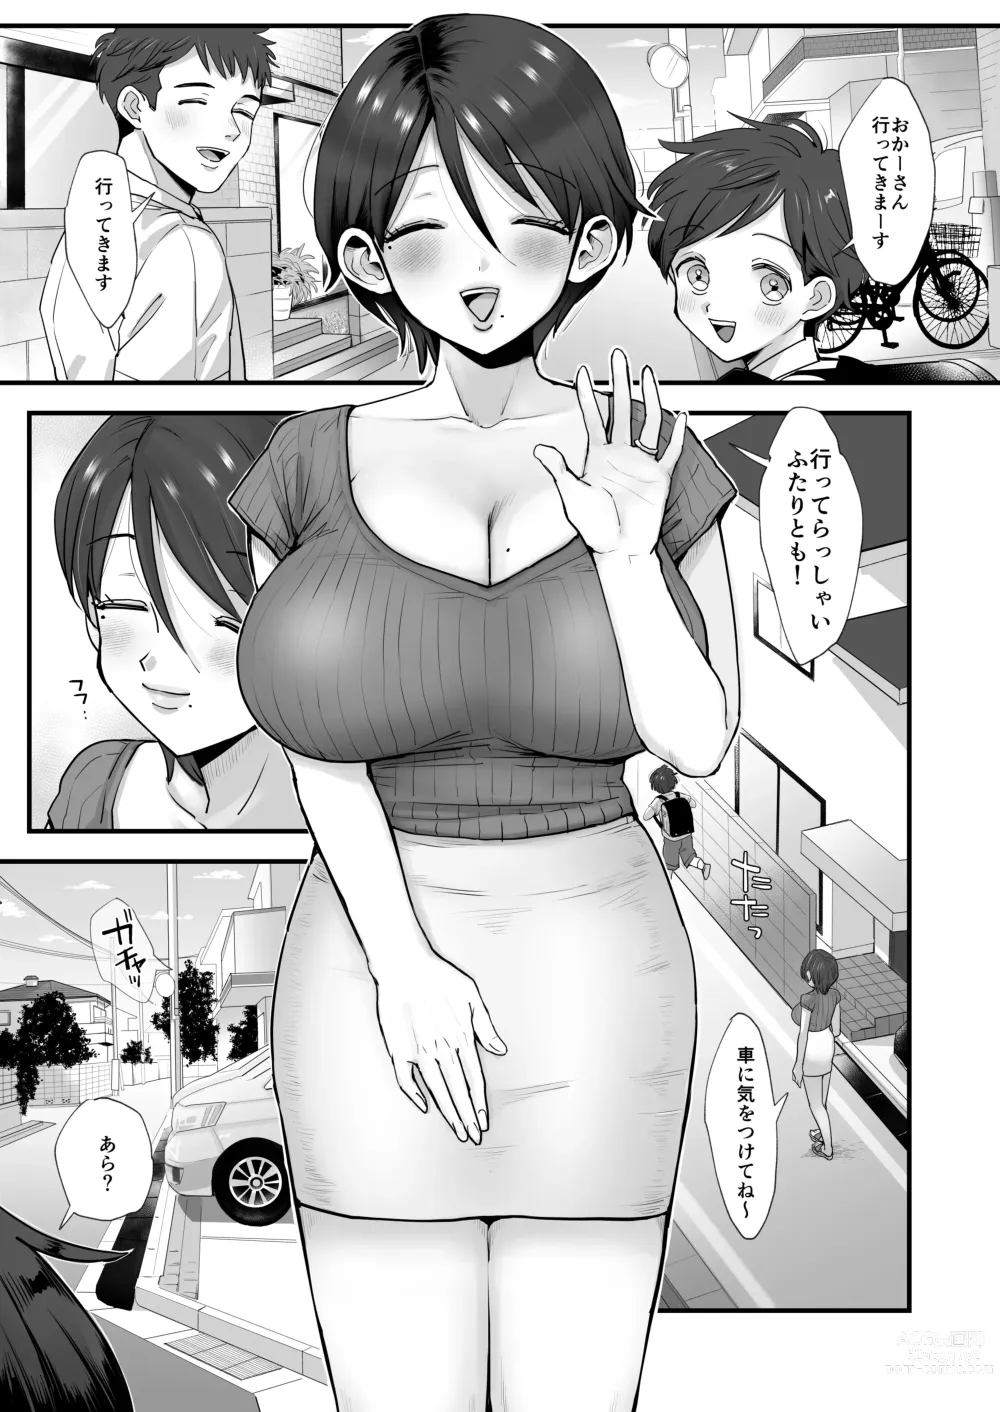 Page 3 of doujinshi Gentle, Busty, Narrow Eyed Momma.